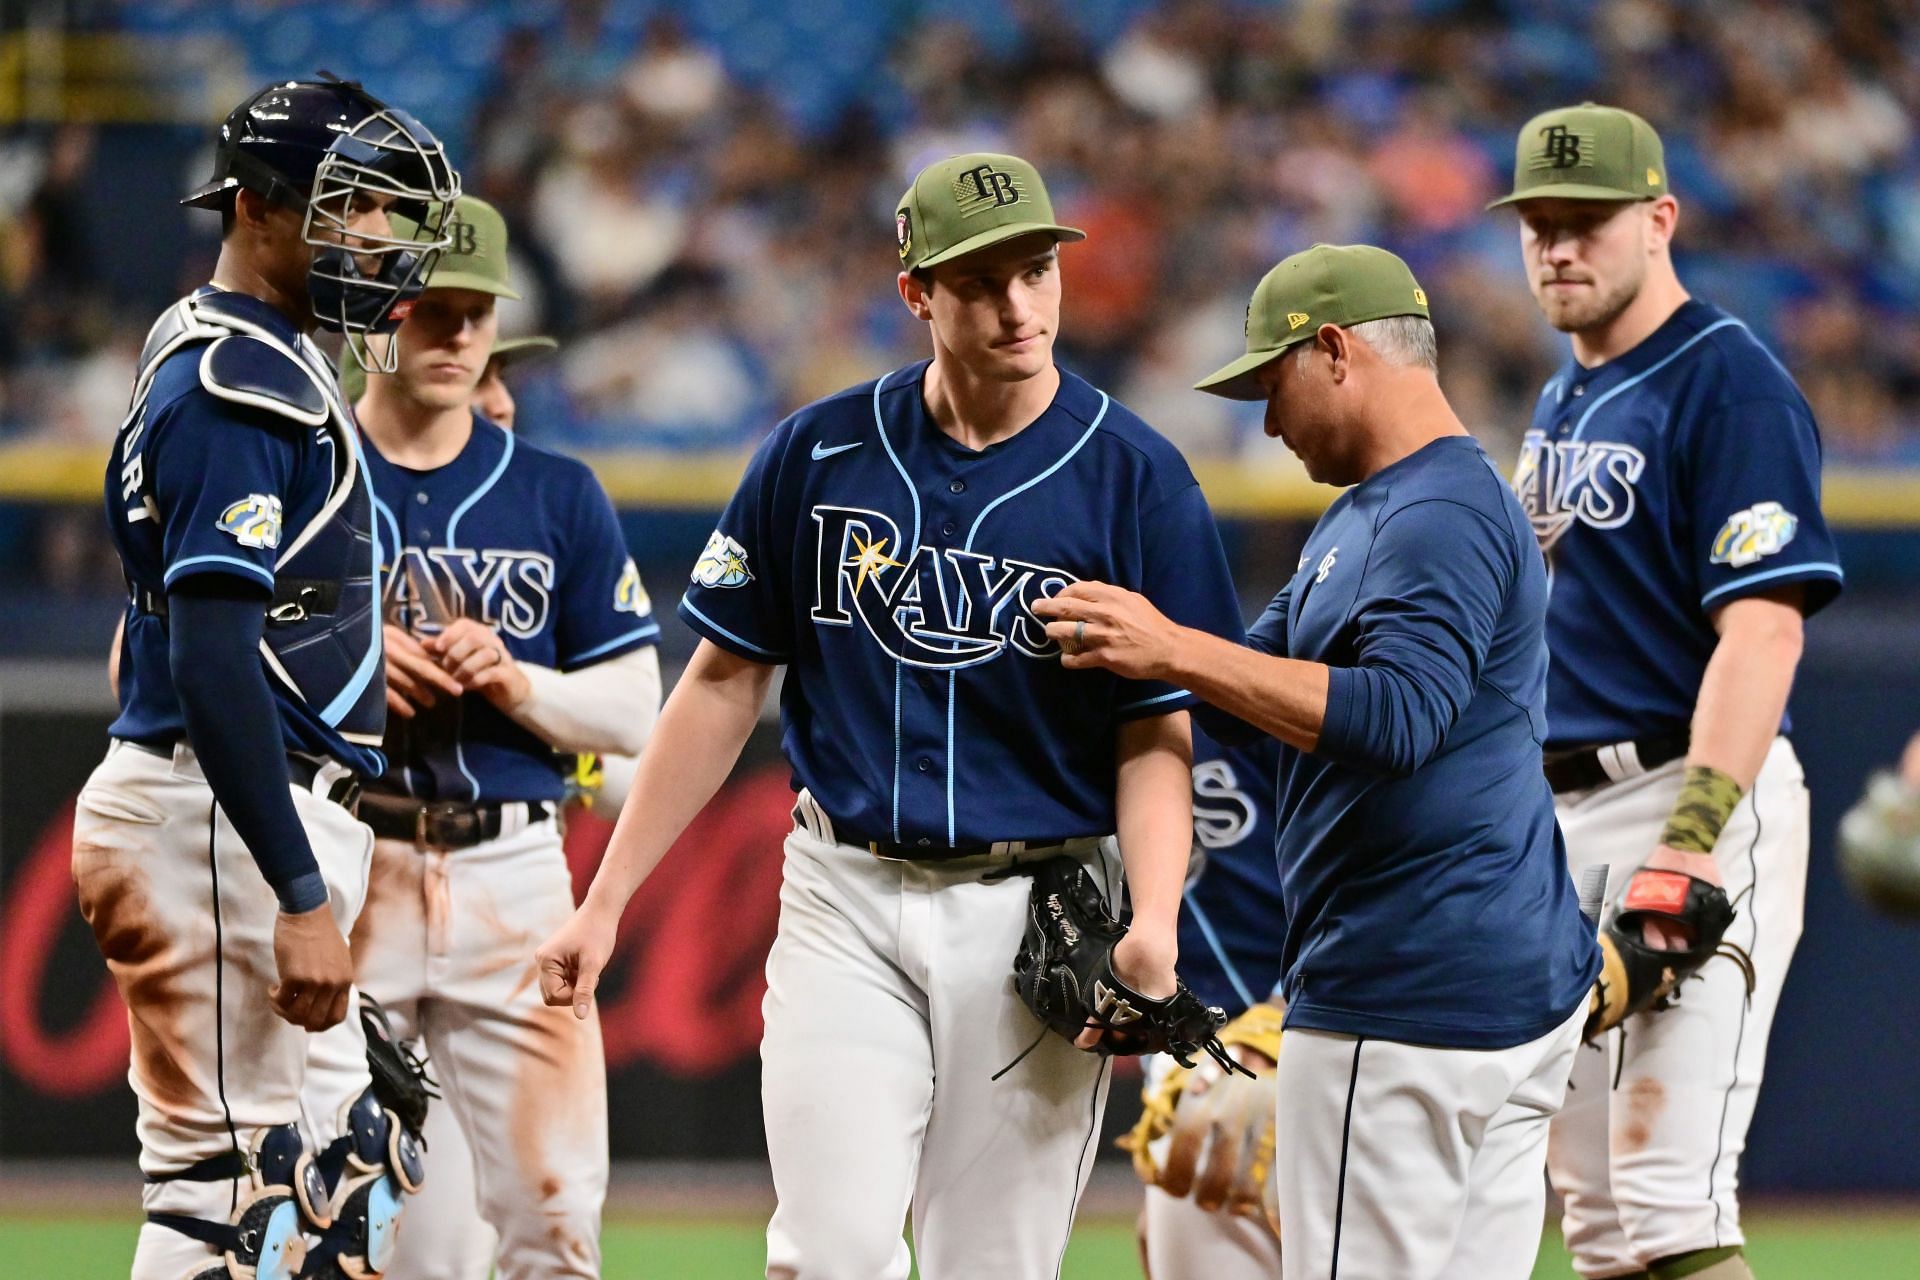 Manager Kevin Cash relieves Kevin Kelly of the Tampa Bay Rays against the Milwaukee Brewers at Tropicana Field